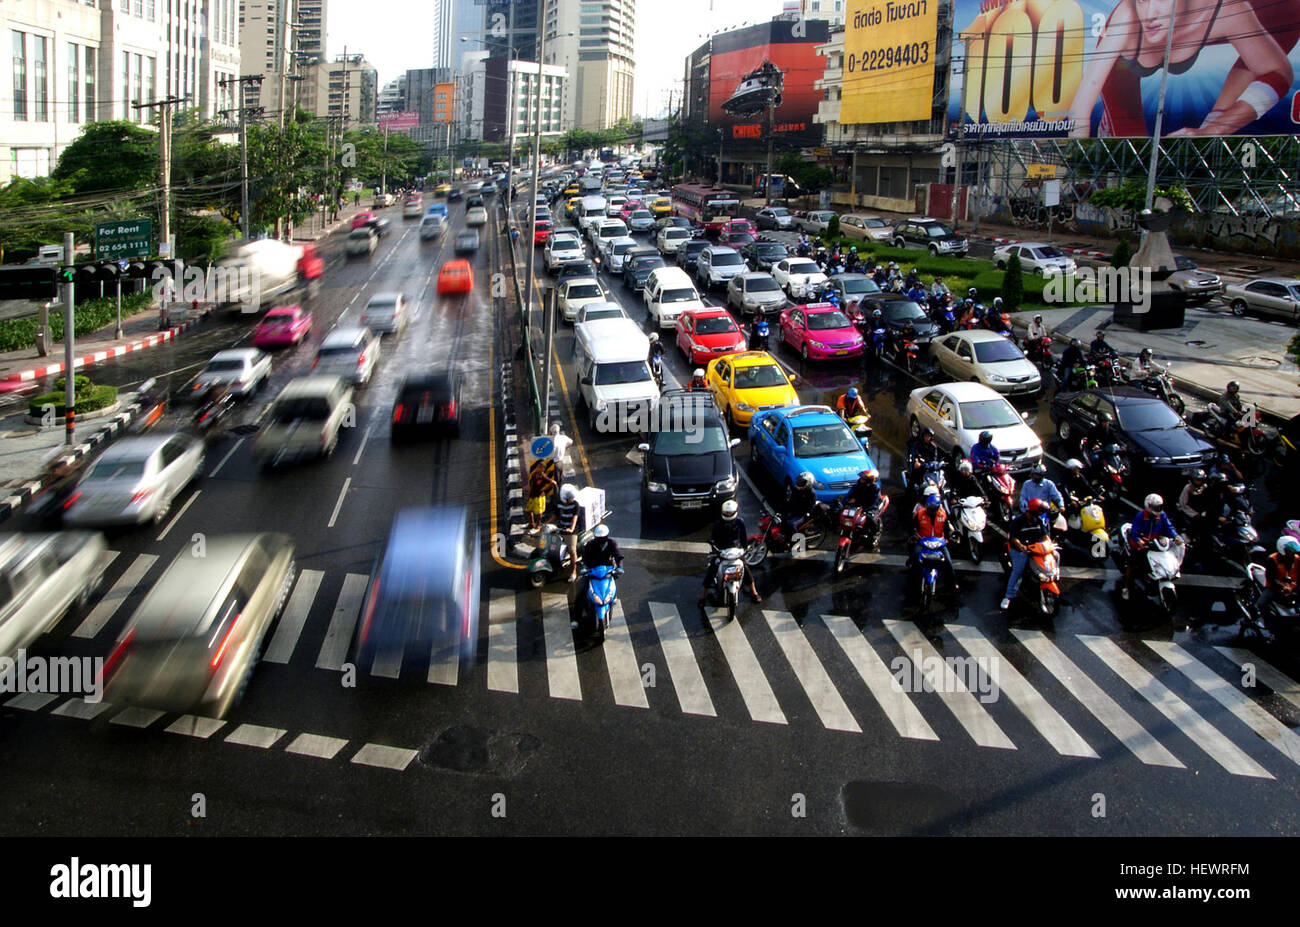 There are more than 7.5 million registered vehicles on the roads of Bangkok, almost one for every resident of a city of nine million people. It is often called “rush hour”, only it lasts most of the day. Trucks, tractors, buses, motorcycles, sedans, auto rickshaws make Bangkok a long-standing poster-child for urban gridlock. The city of 11 million is driving itself to a standstill as this congestion is expected to get a lot worse in 2013 Stock Photo